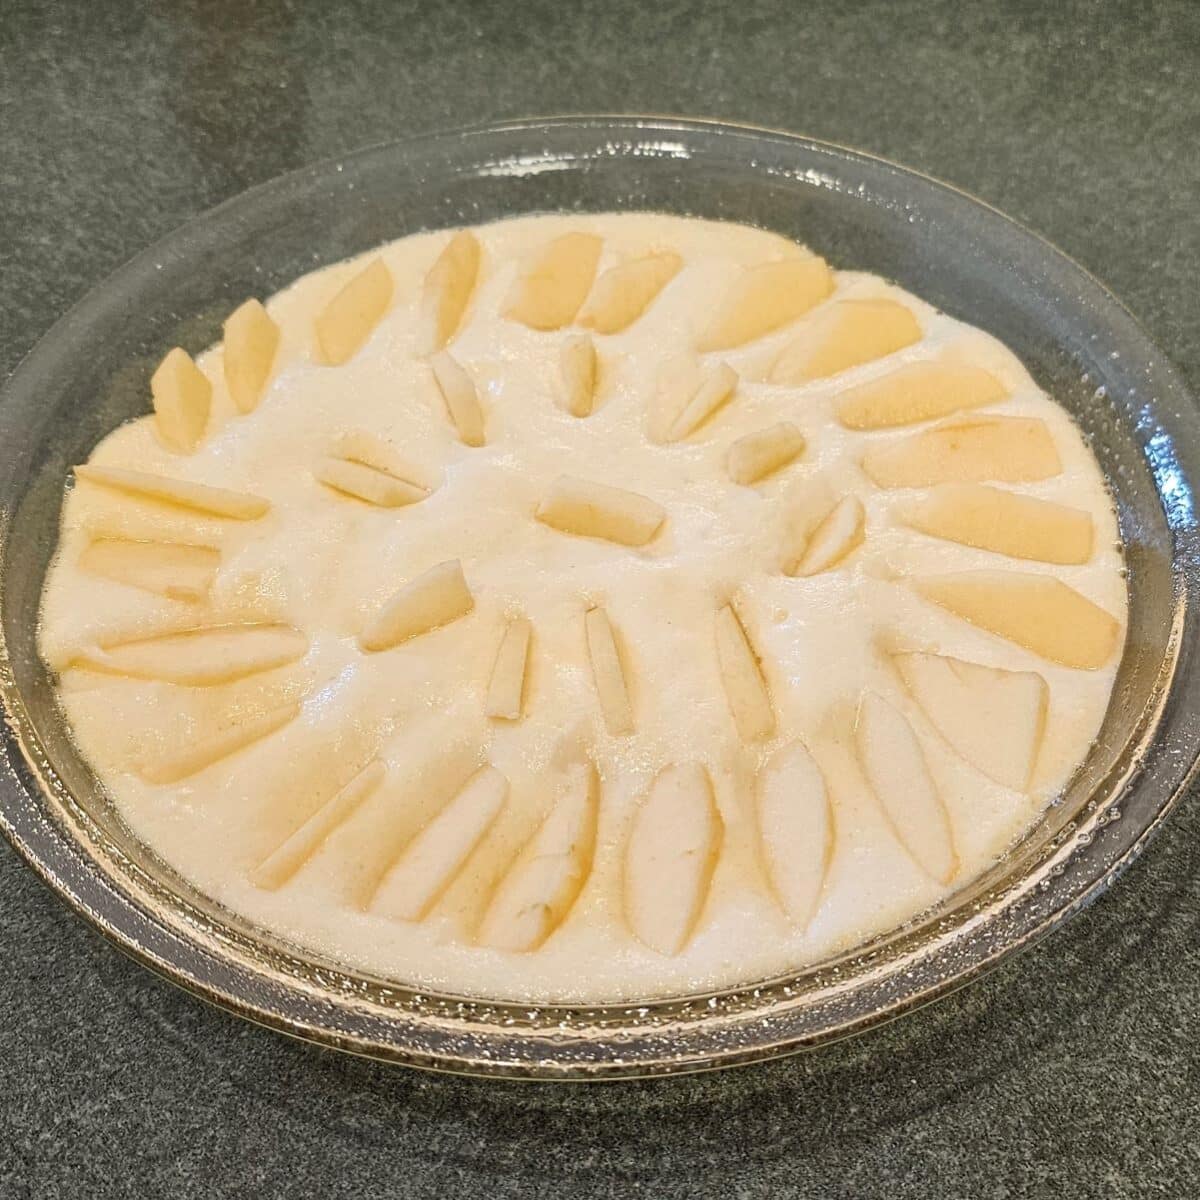 German Pancakes Recipe step before baking in an oven for arranging apples on top of German Pancake batter in a circular pattern.